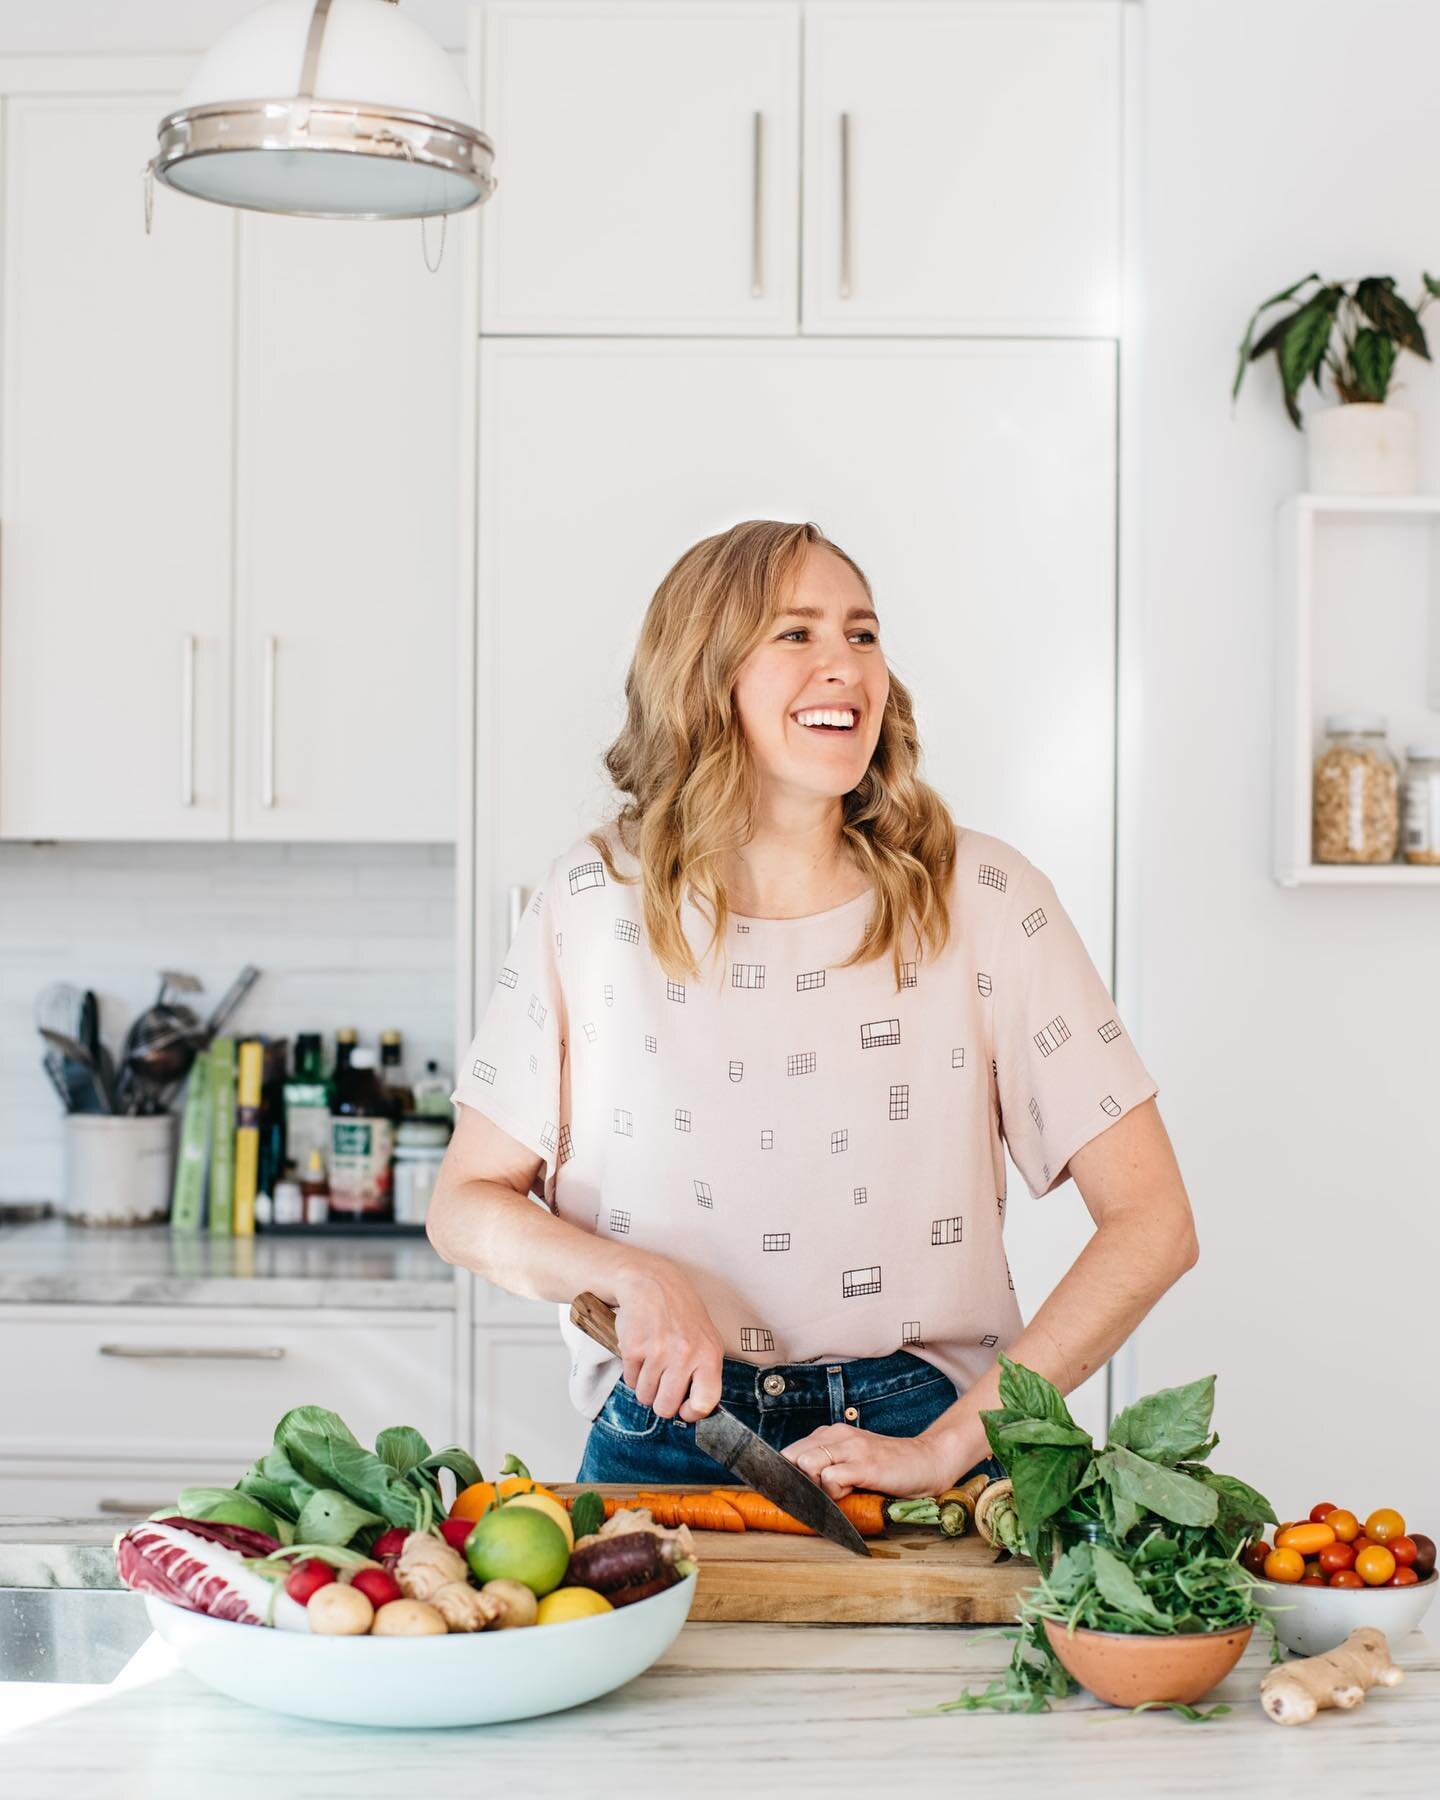 Y&rsquo;ALL. We hope you&rsquo;ve got your learning caps on, because in today&rsquo;s episode we are learning about all things gut health with the help of @phoebelapine, aka Sara&rsquo;s &ldquo;Wellness Fairy Godmother.&rdquo; ✨ We chat with Phoebe a